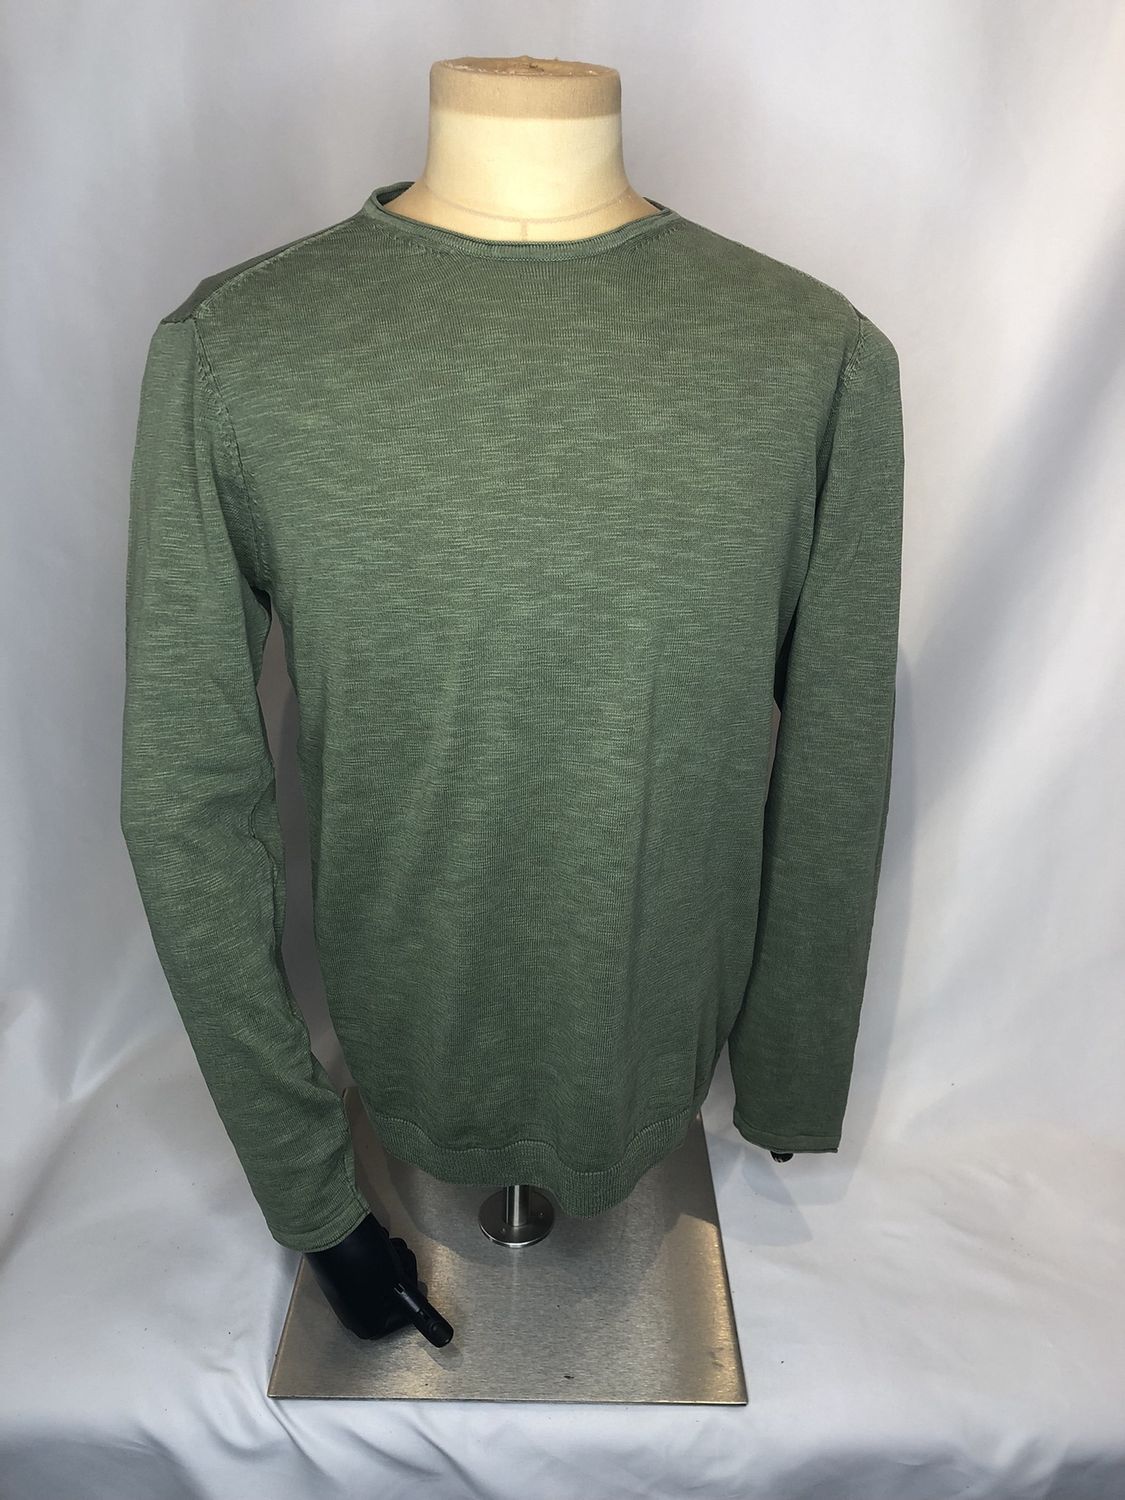 100% Cotton long sleeve tops, Colour: Green, SIZE: M